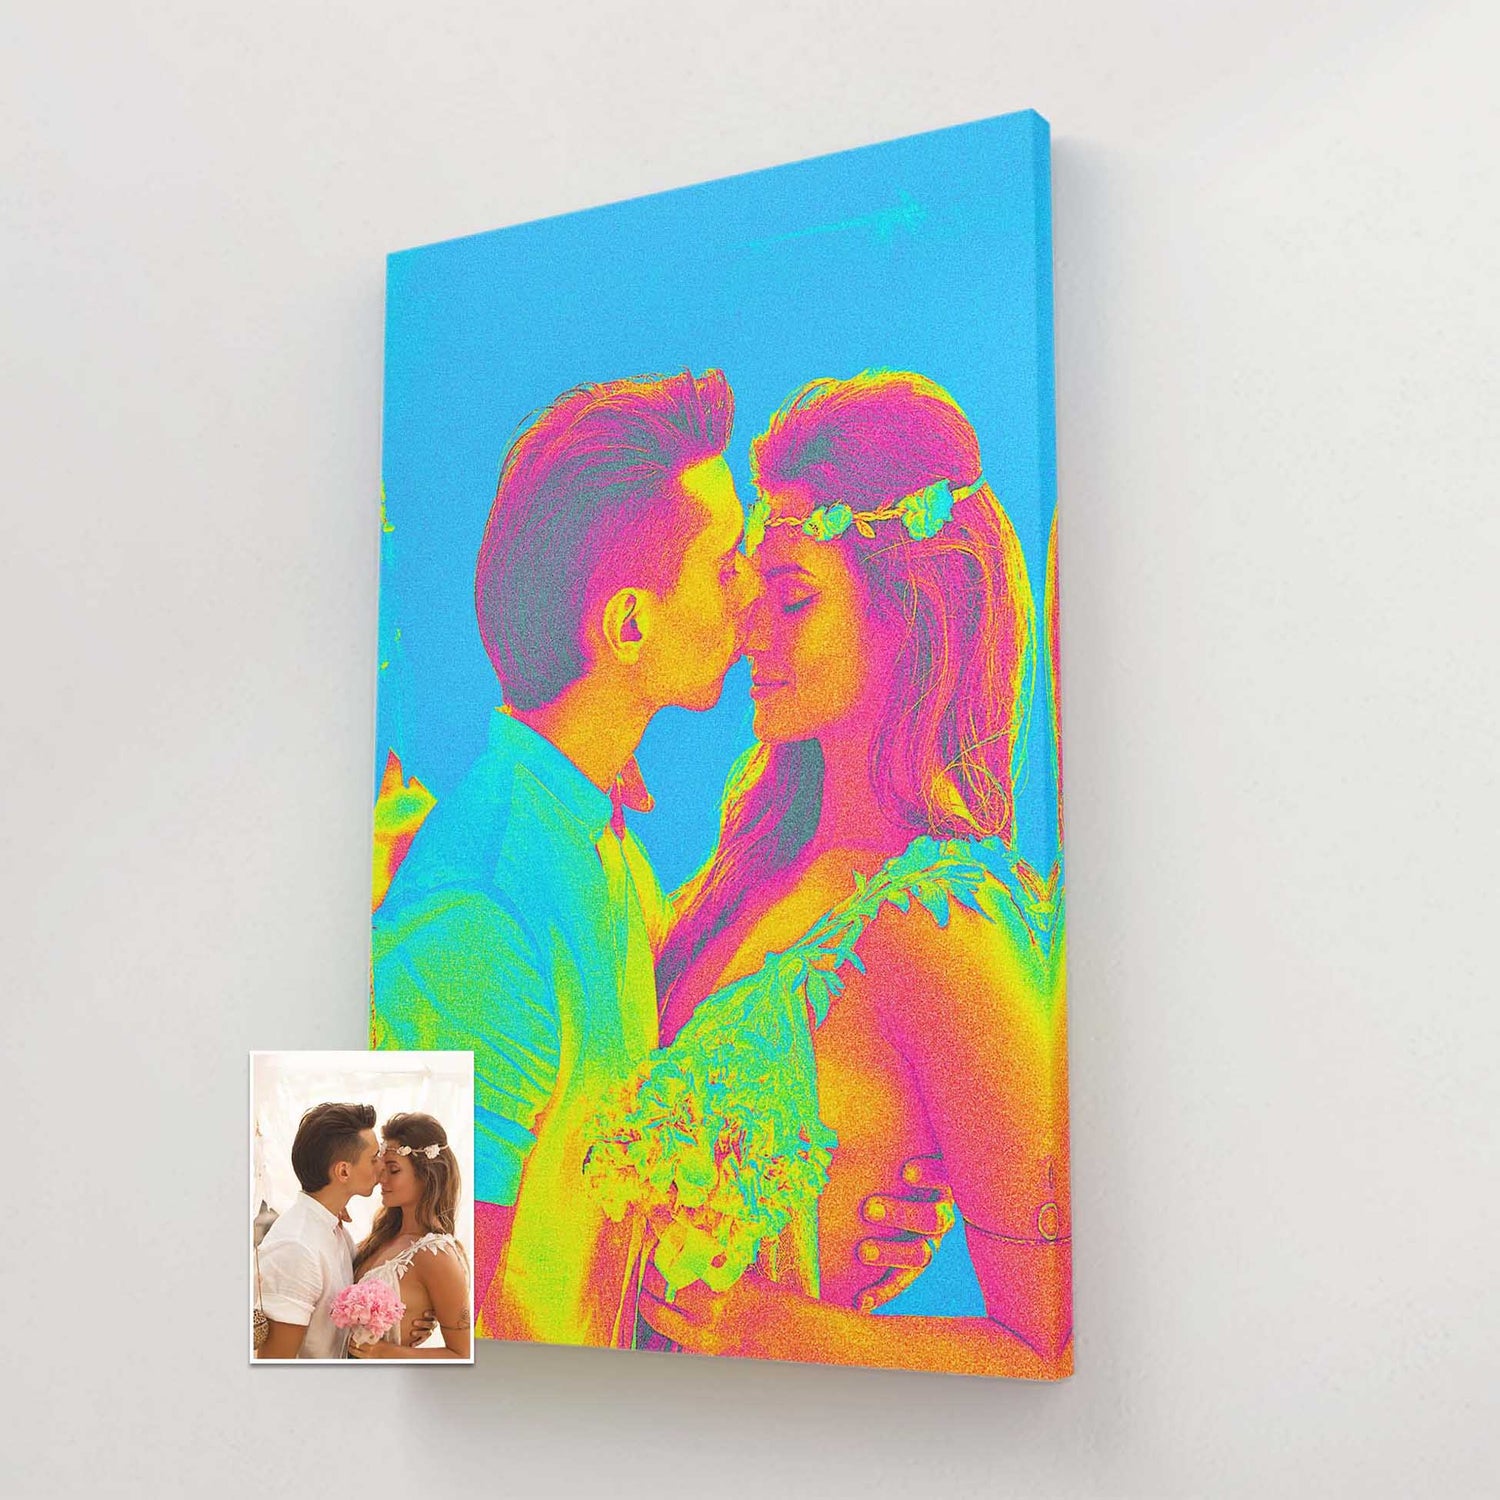 Discover the beauty of personalized digital art with our canvas collection. Each piece is crafted from your photo, resulting in a captivating and visually immersive home decor experience